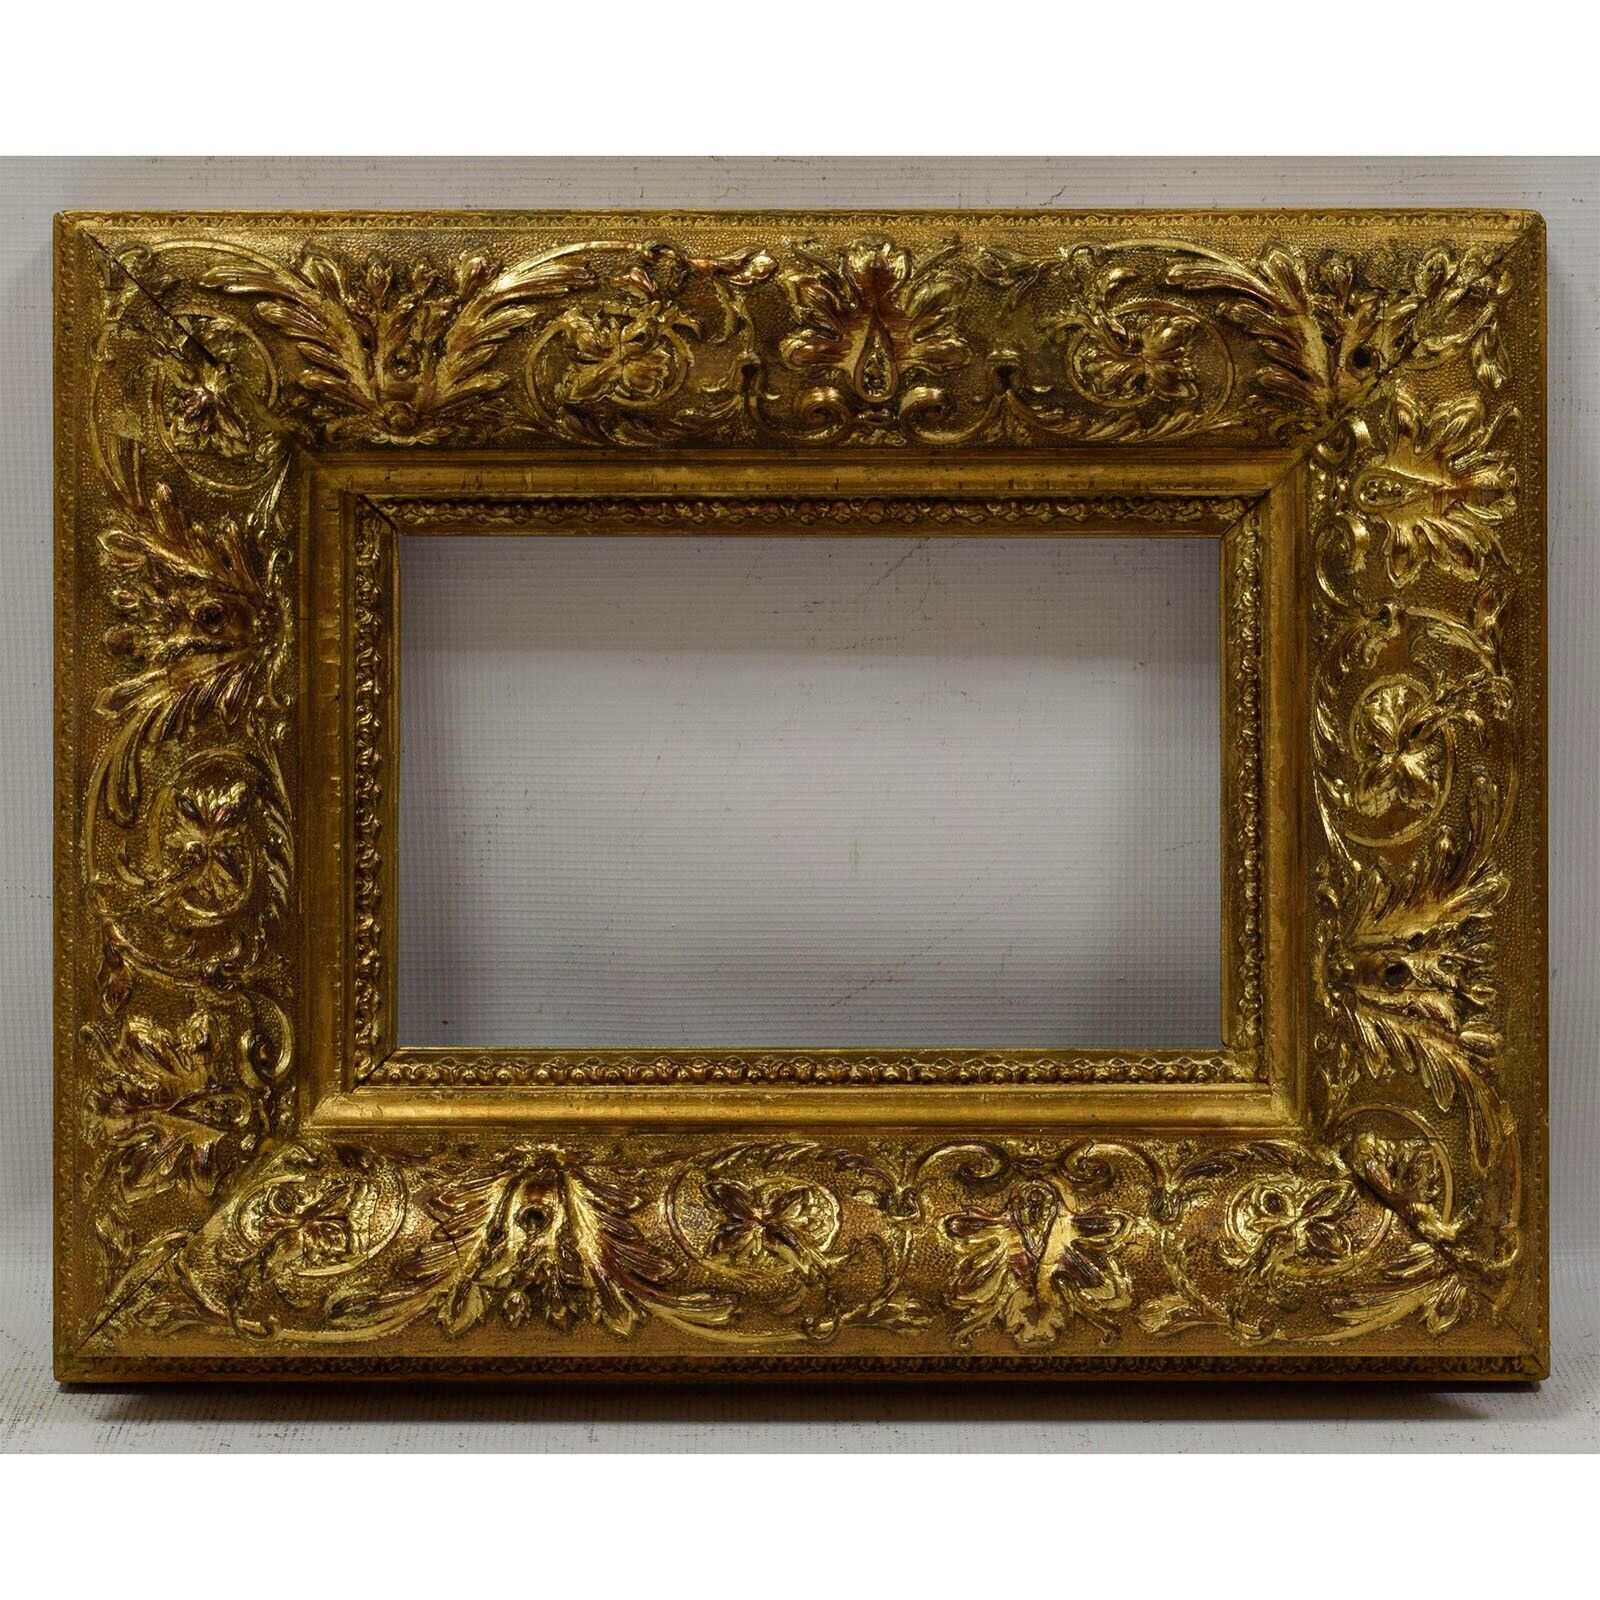 Ca.1850-1900 Old wooden frame decorative with metal leaf Internal: 12.5x8.6 in